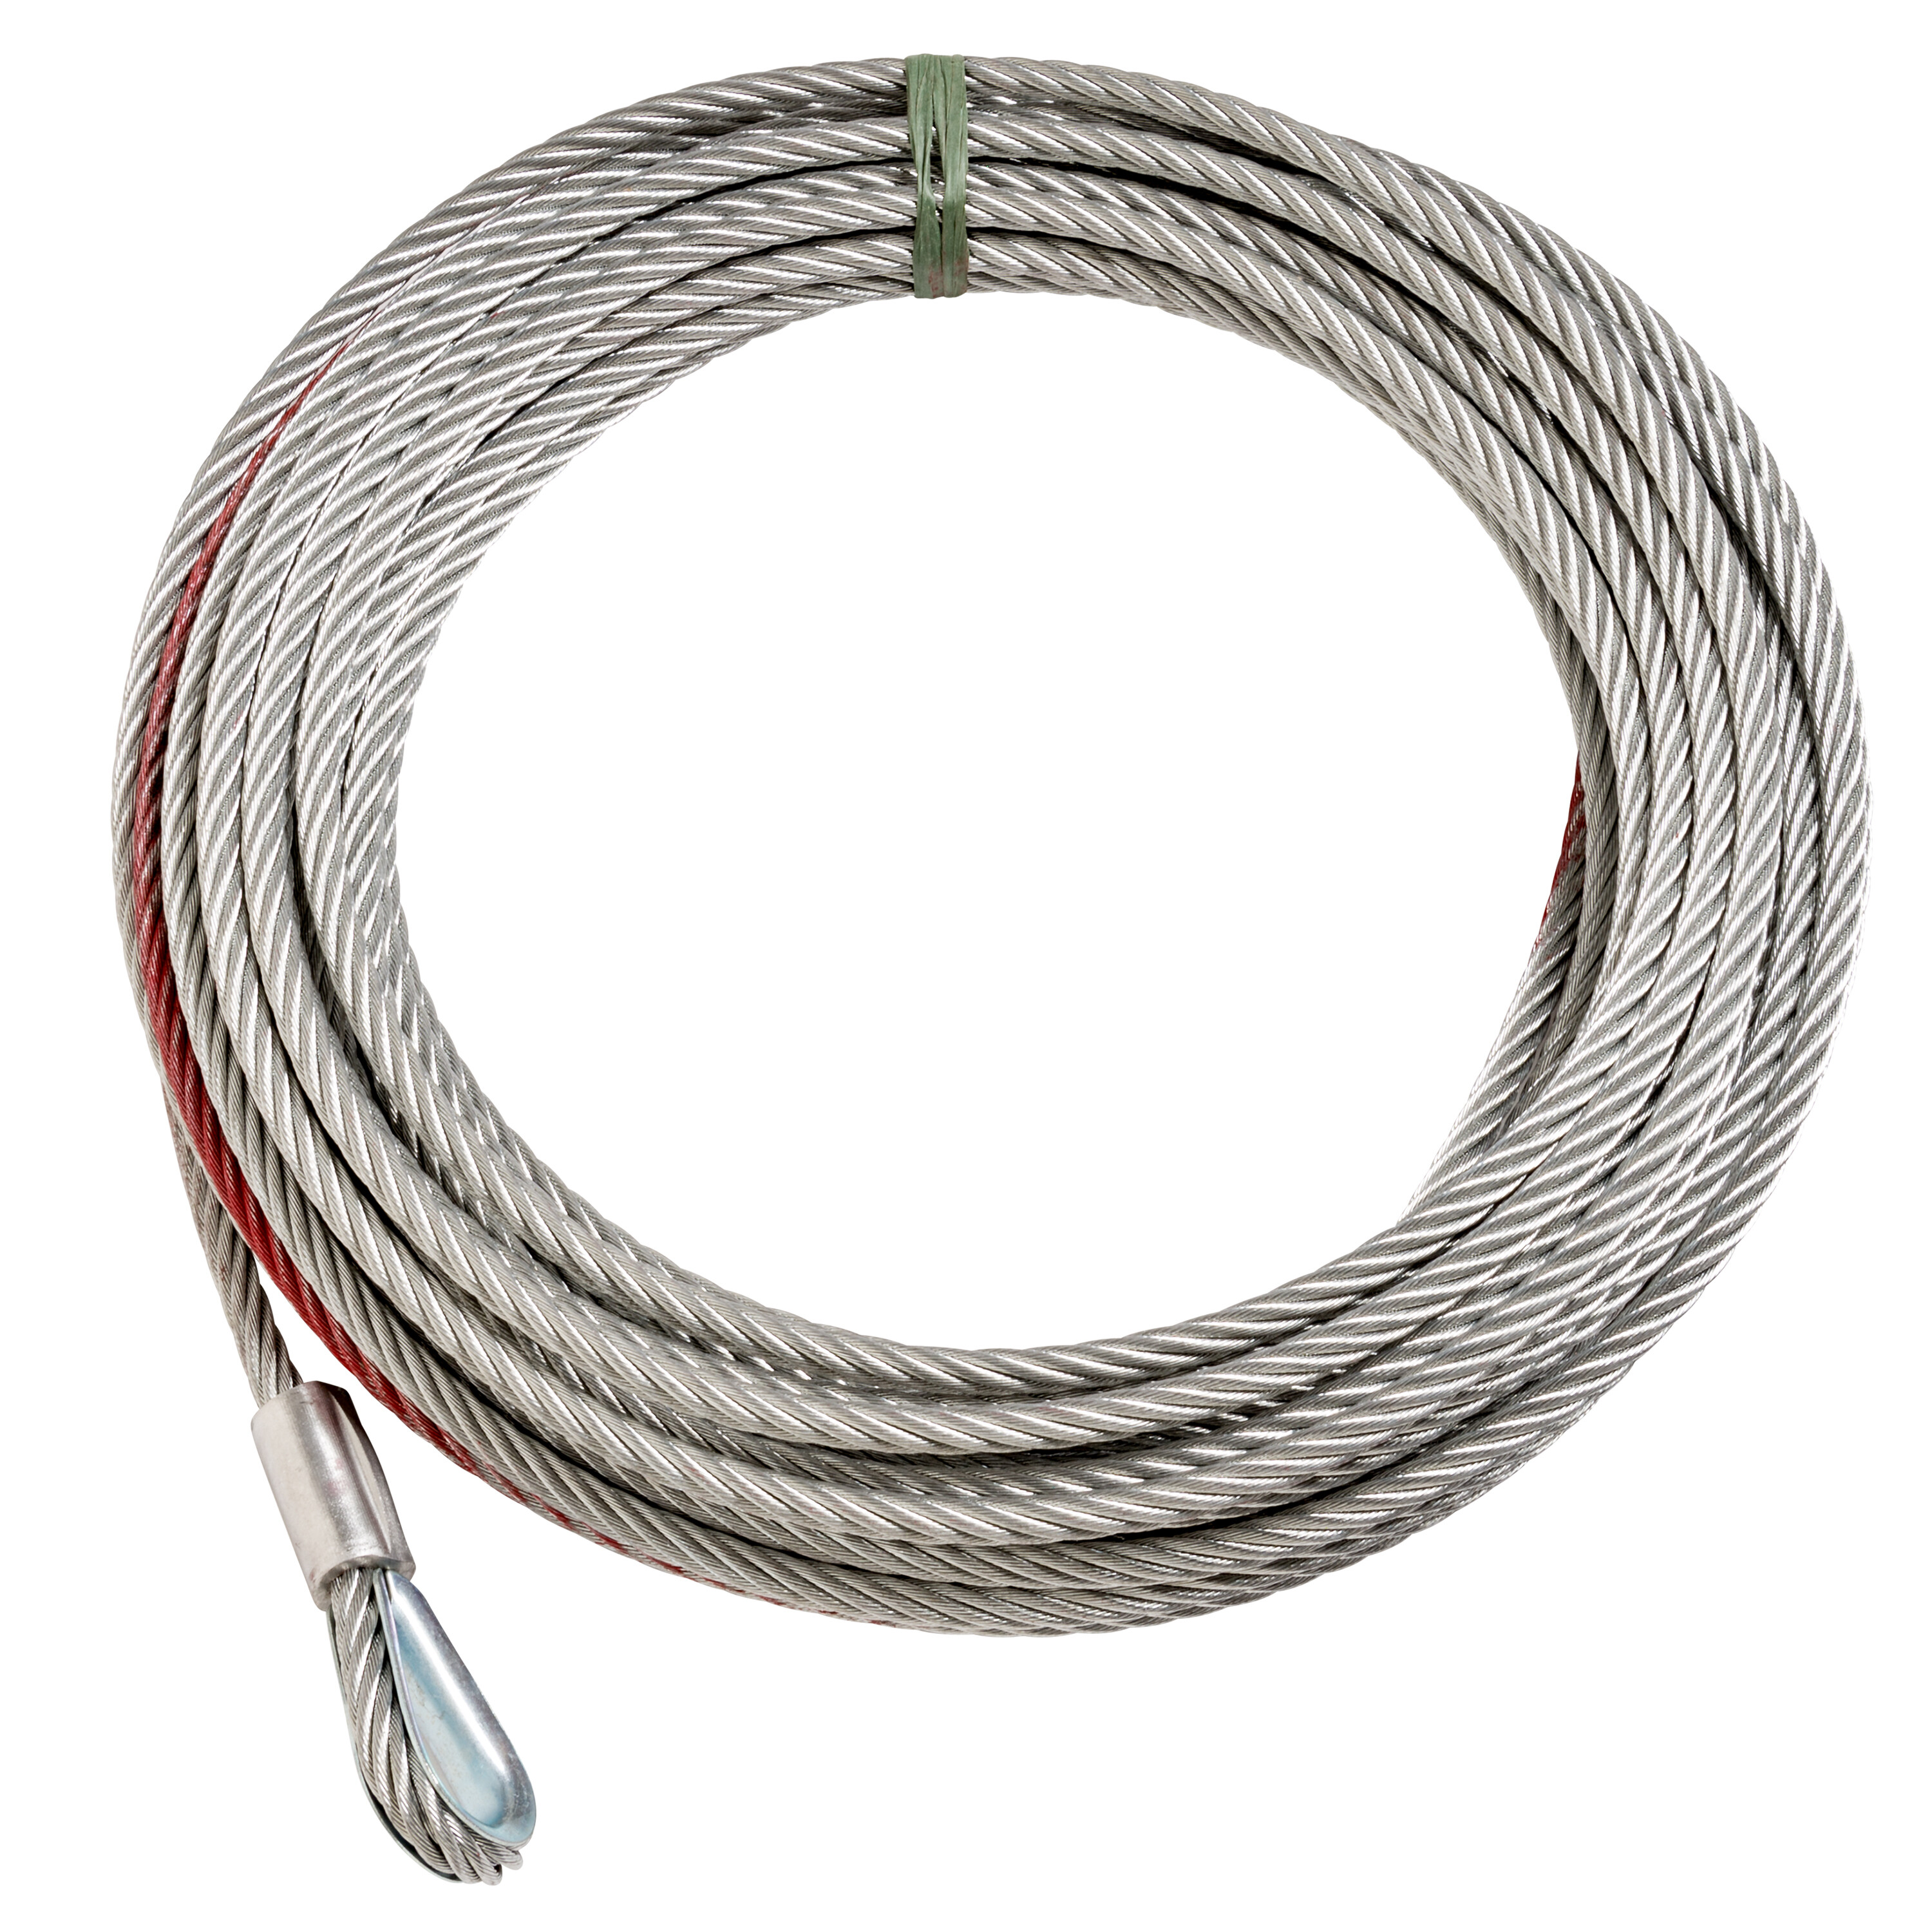 Replacement 92' Galvanized Rope